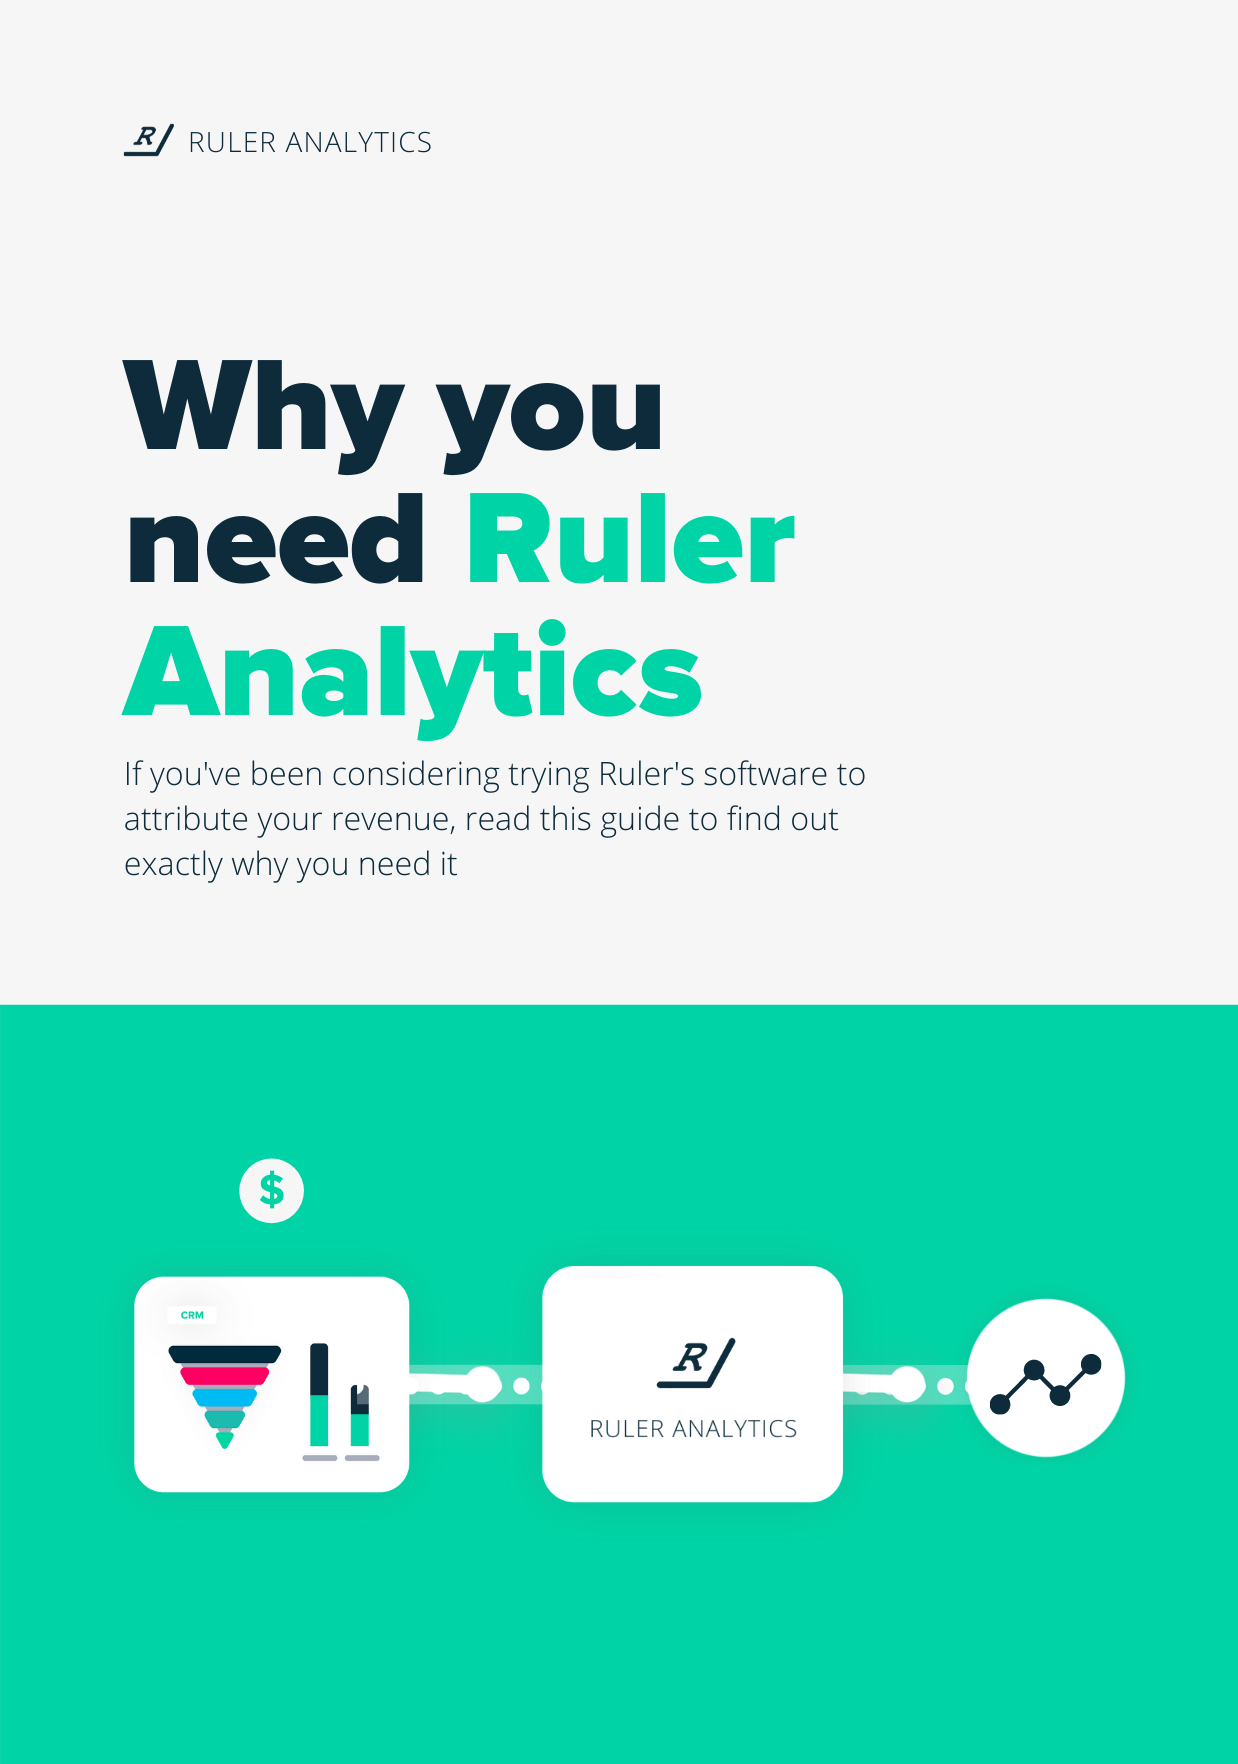 Why you need Ruler Analytics